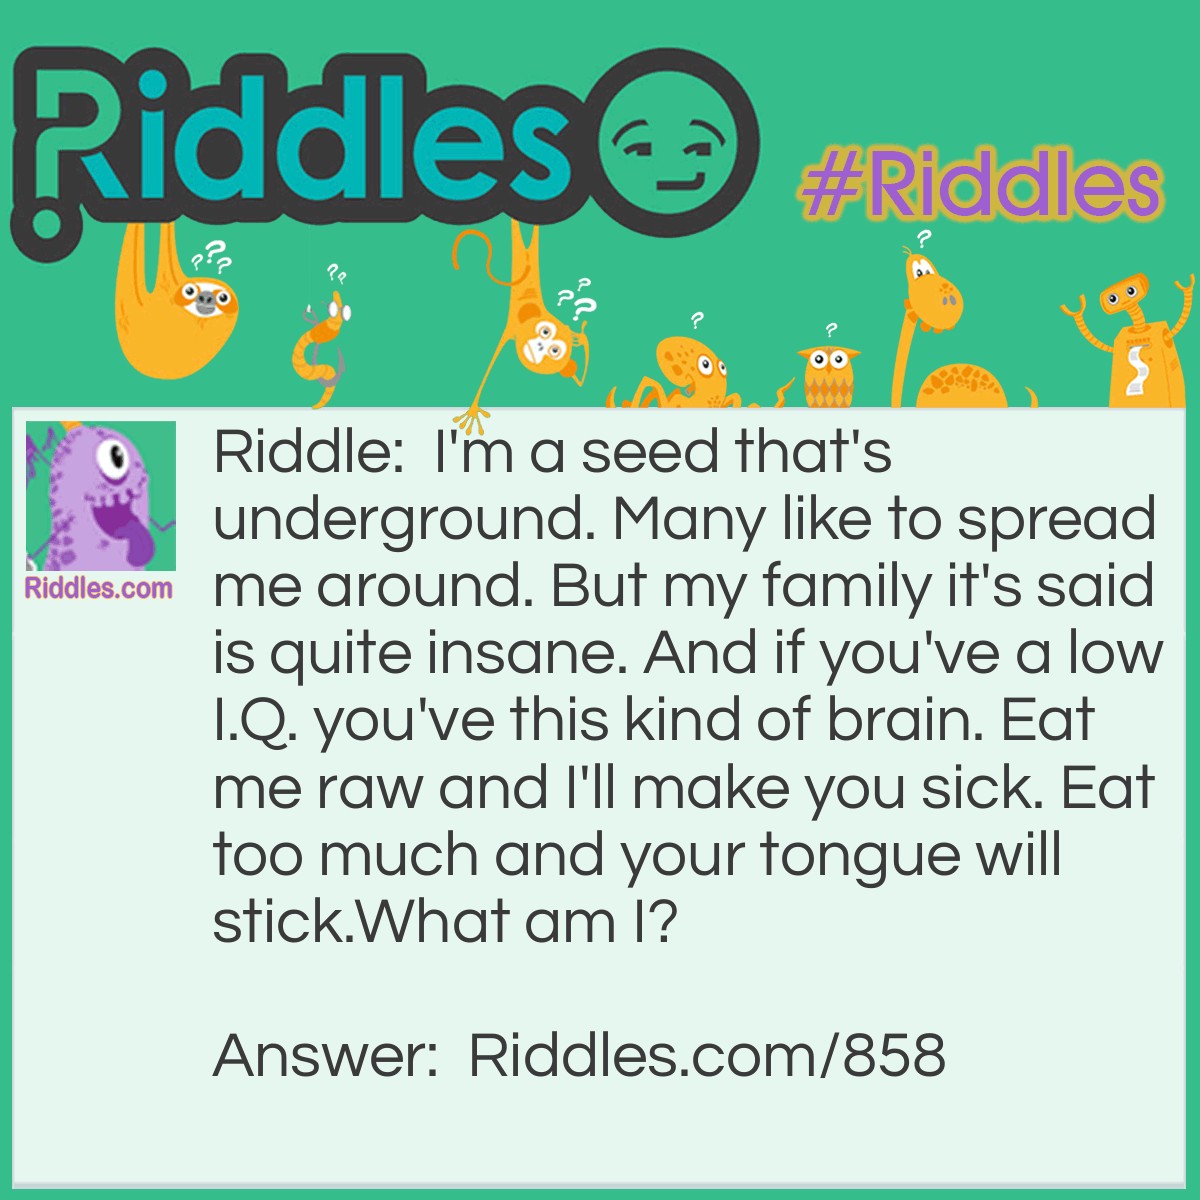 Riddle: I'm a seed that's underground. Many like to spread me around. But my family it's said is quite insane. And if you've a low I.Q. you've this kind of brain. Eat me raw and I'll make you sick. Eat too much and your tongue will stick.
What am I? Answer: A peanut.